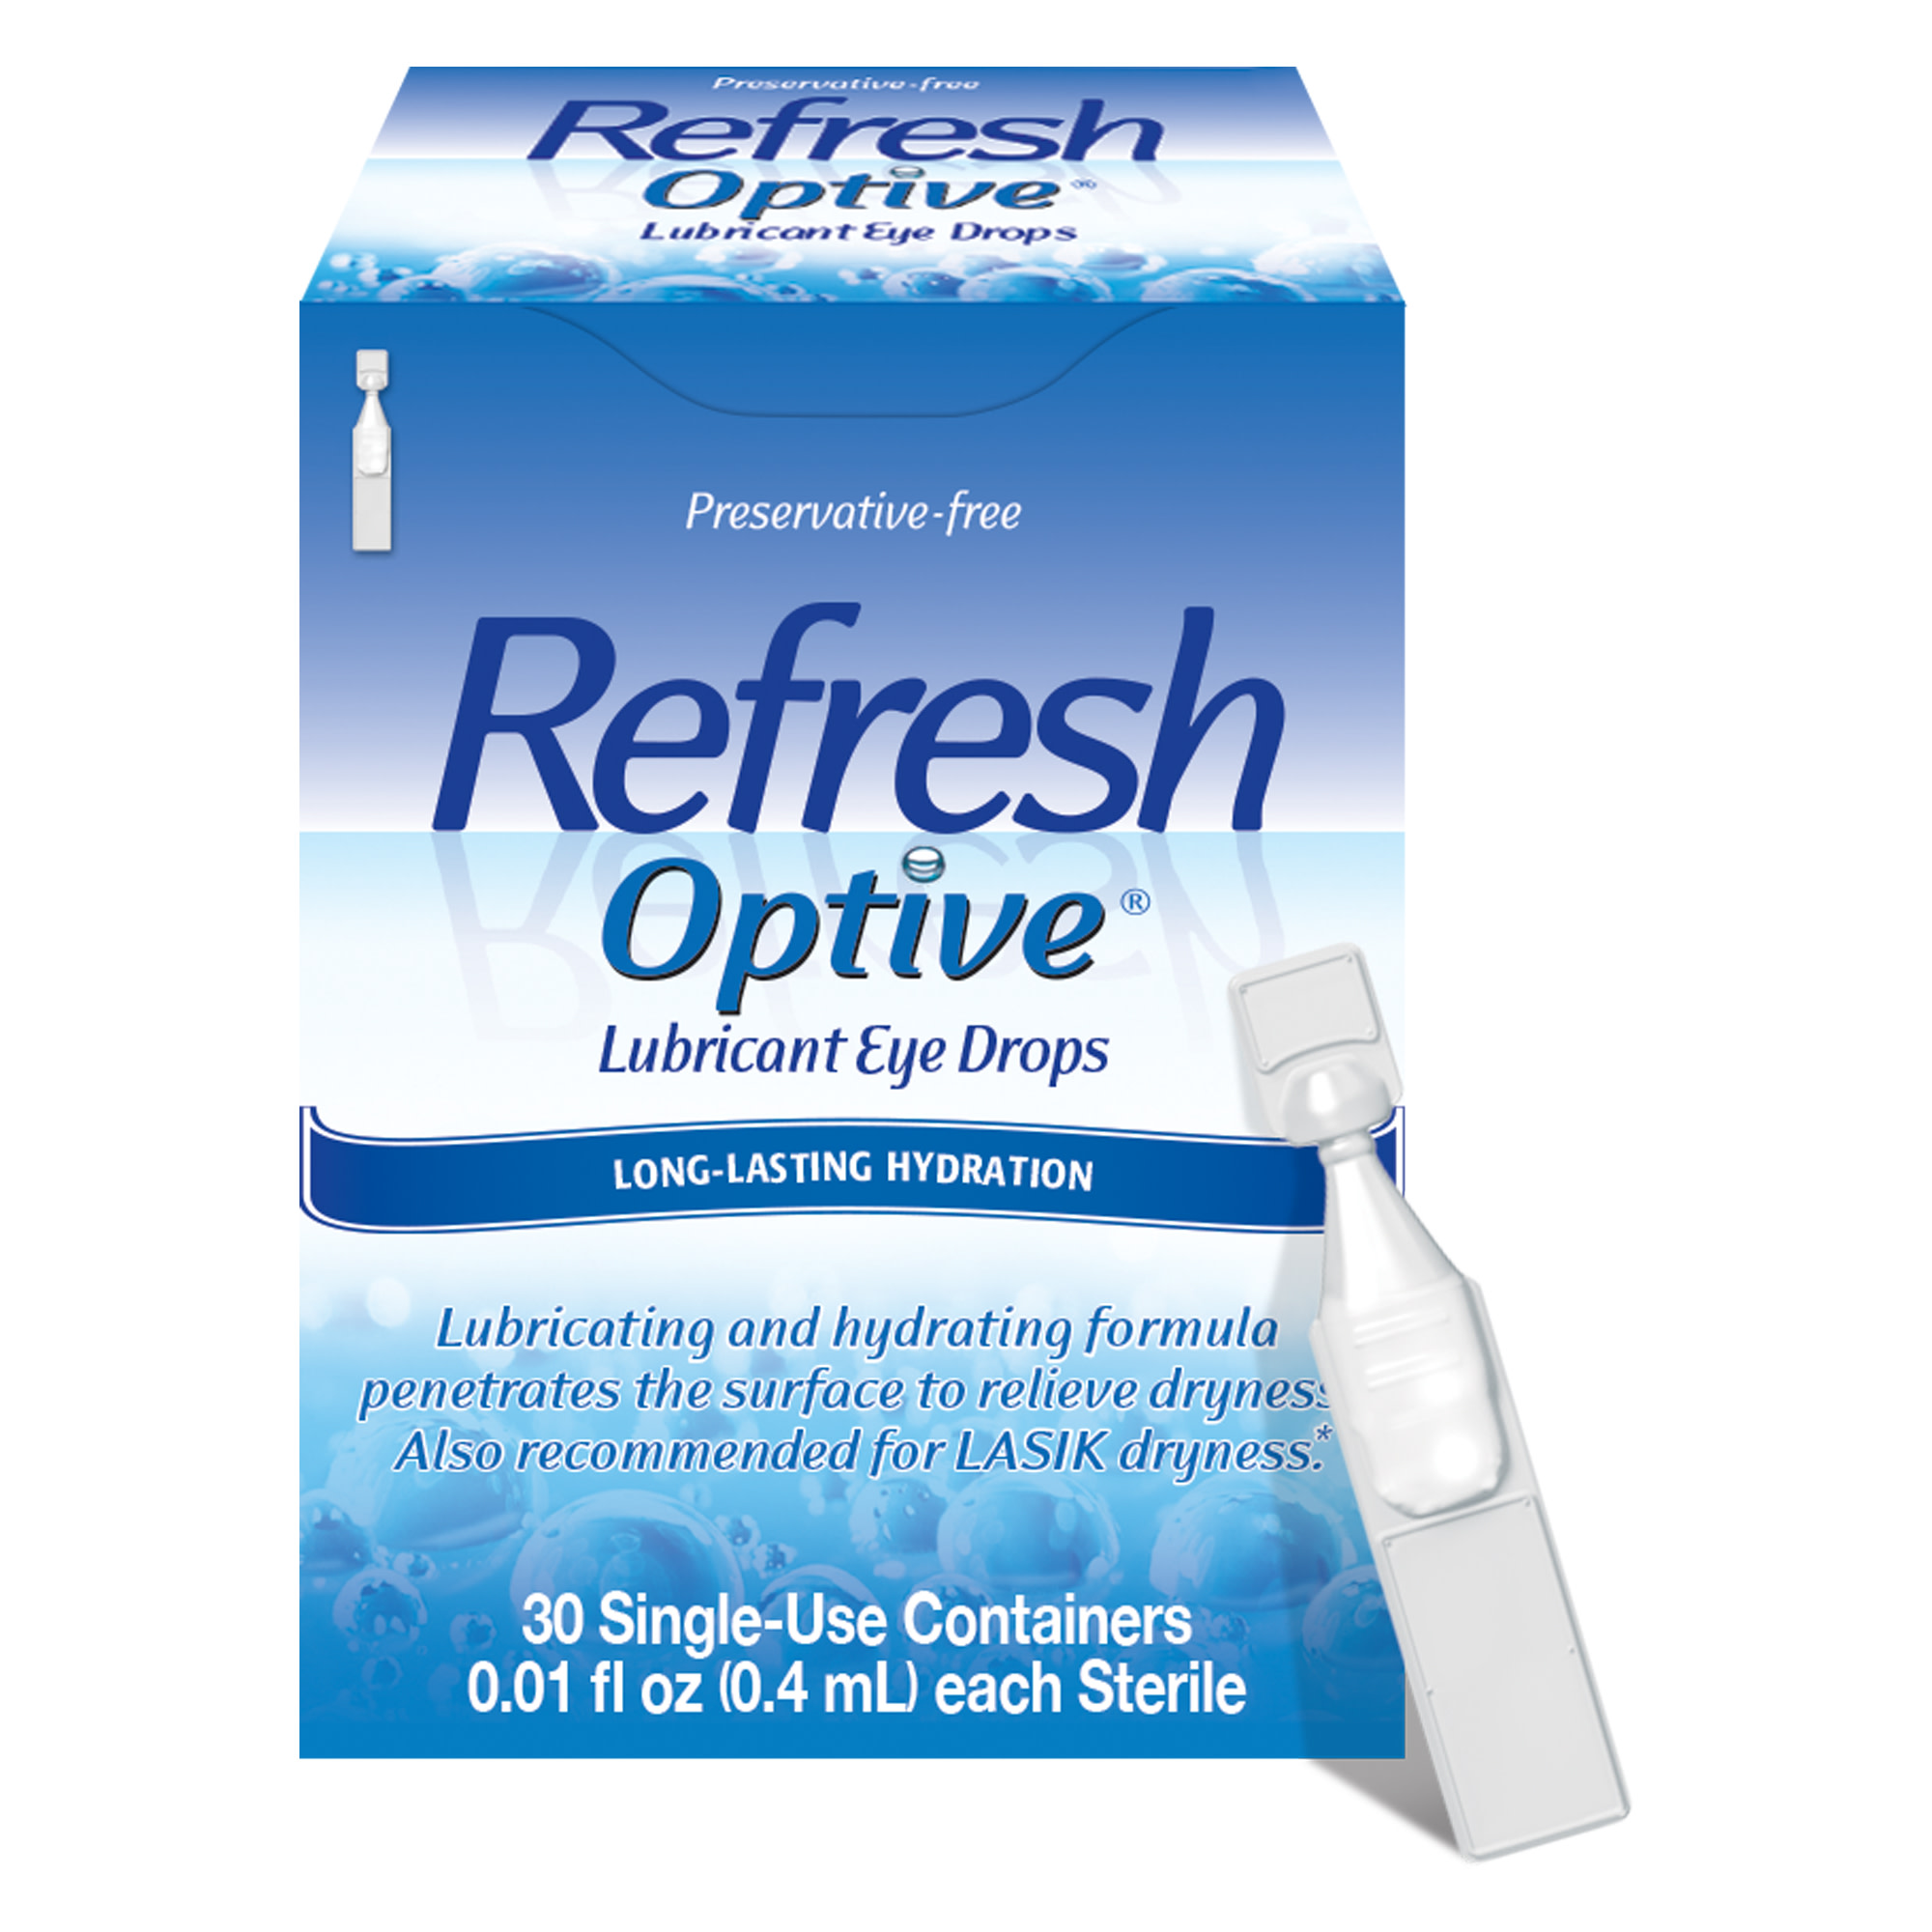 Refresh Optive Lubricant Eye Drops Preservative-Free Tears, 0.4 ml, 30 Count - image 1 of 15